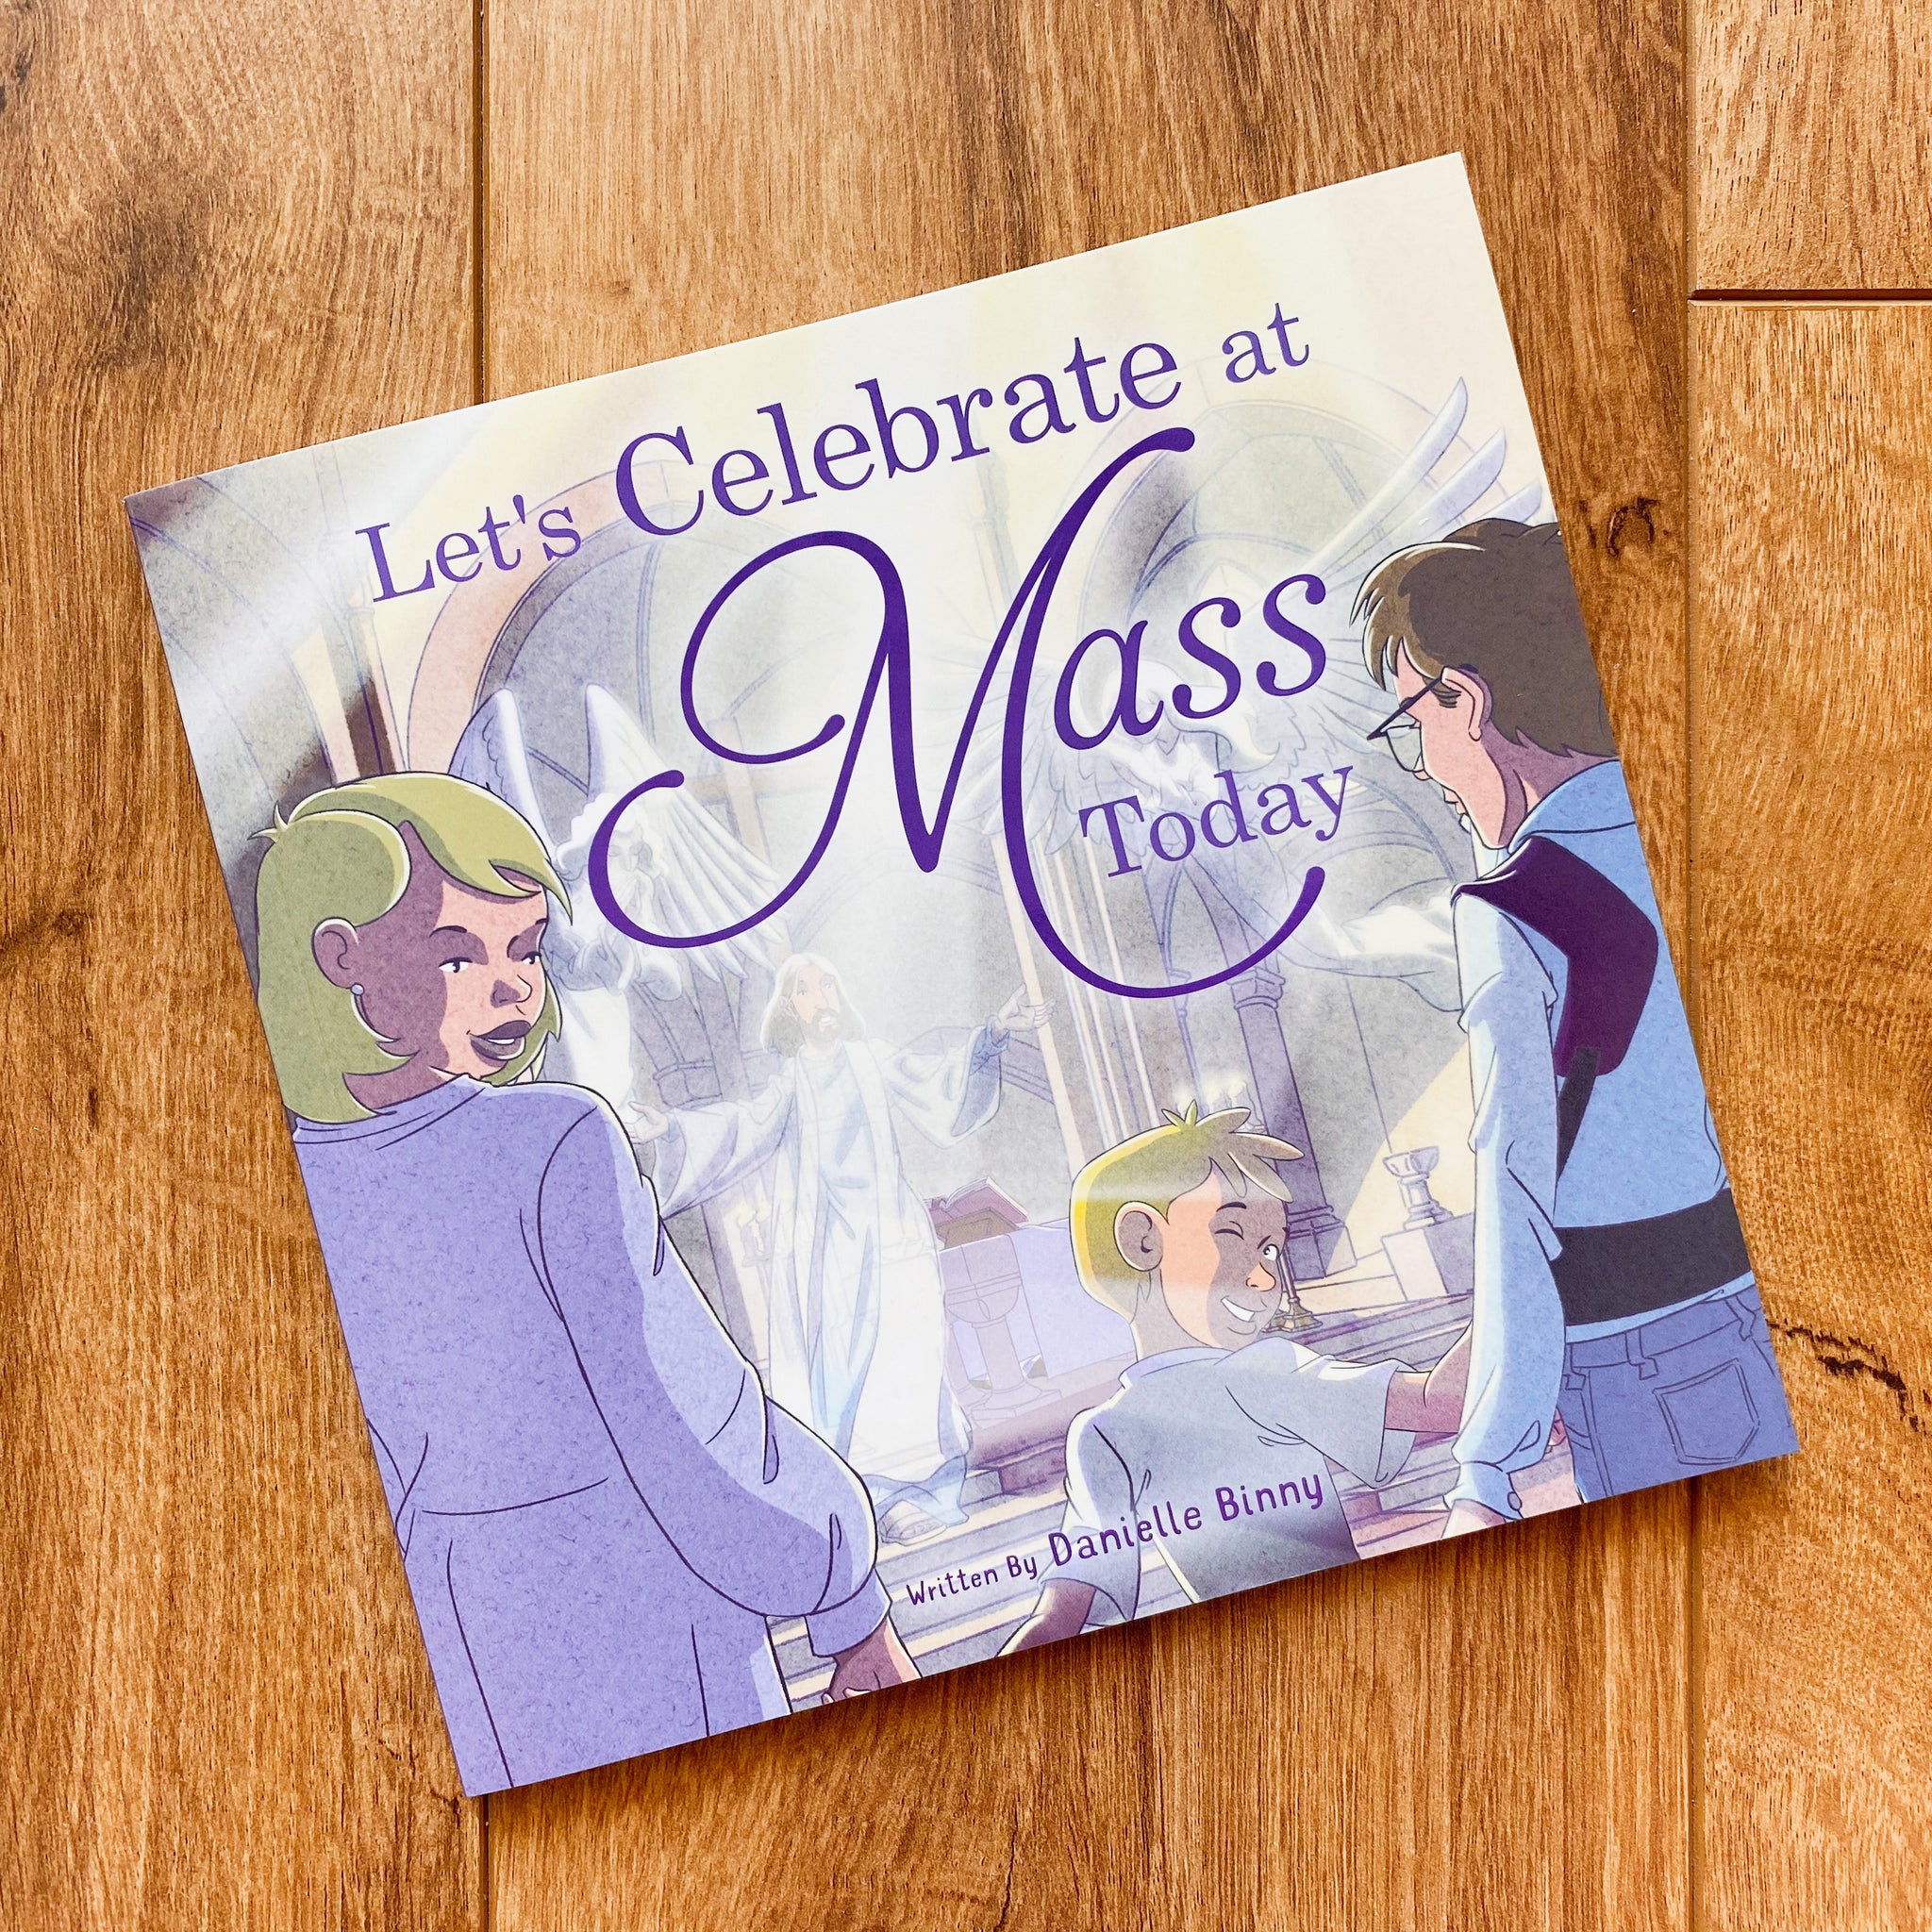 Let’s Celebrate at Mass Today